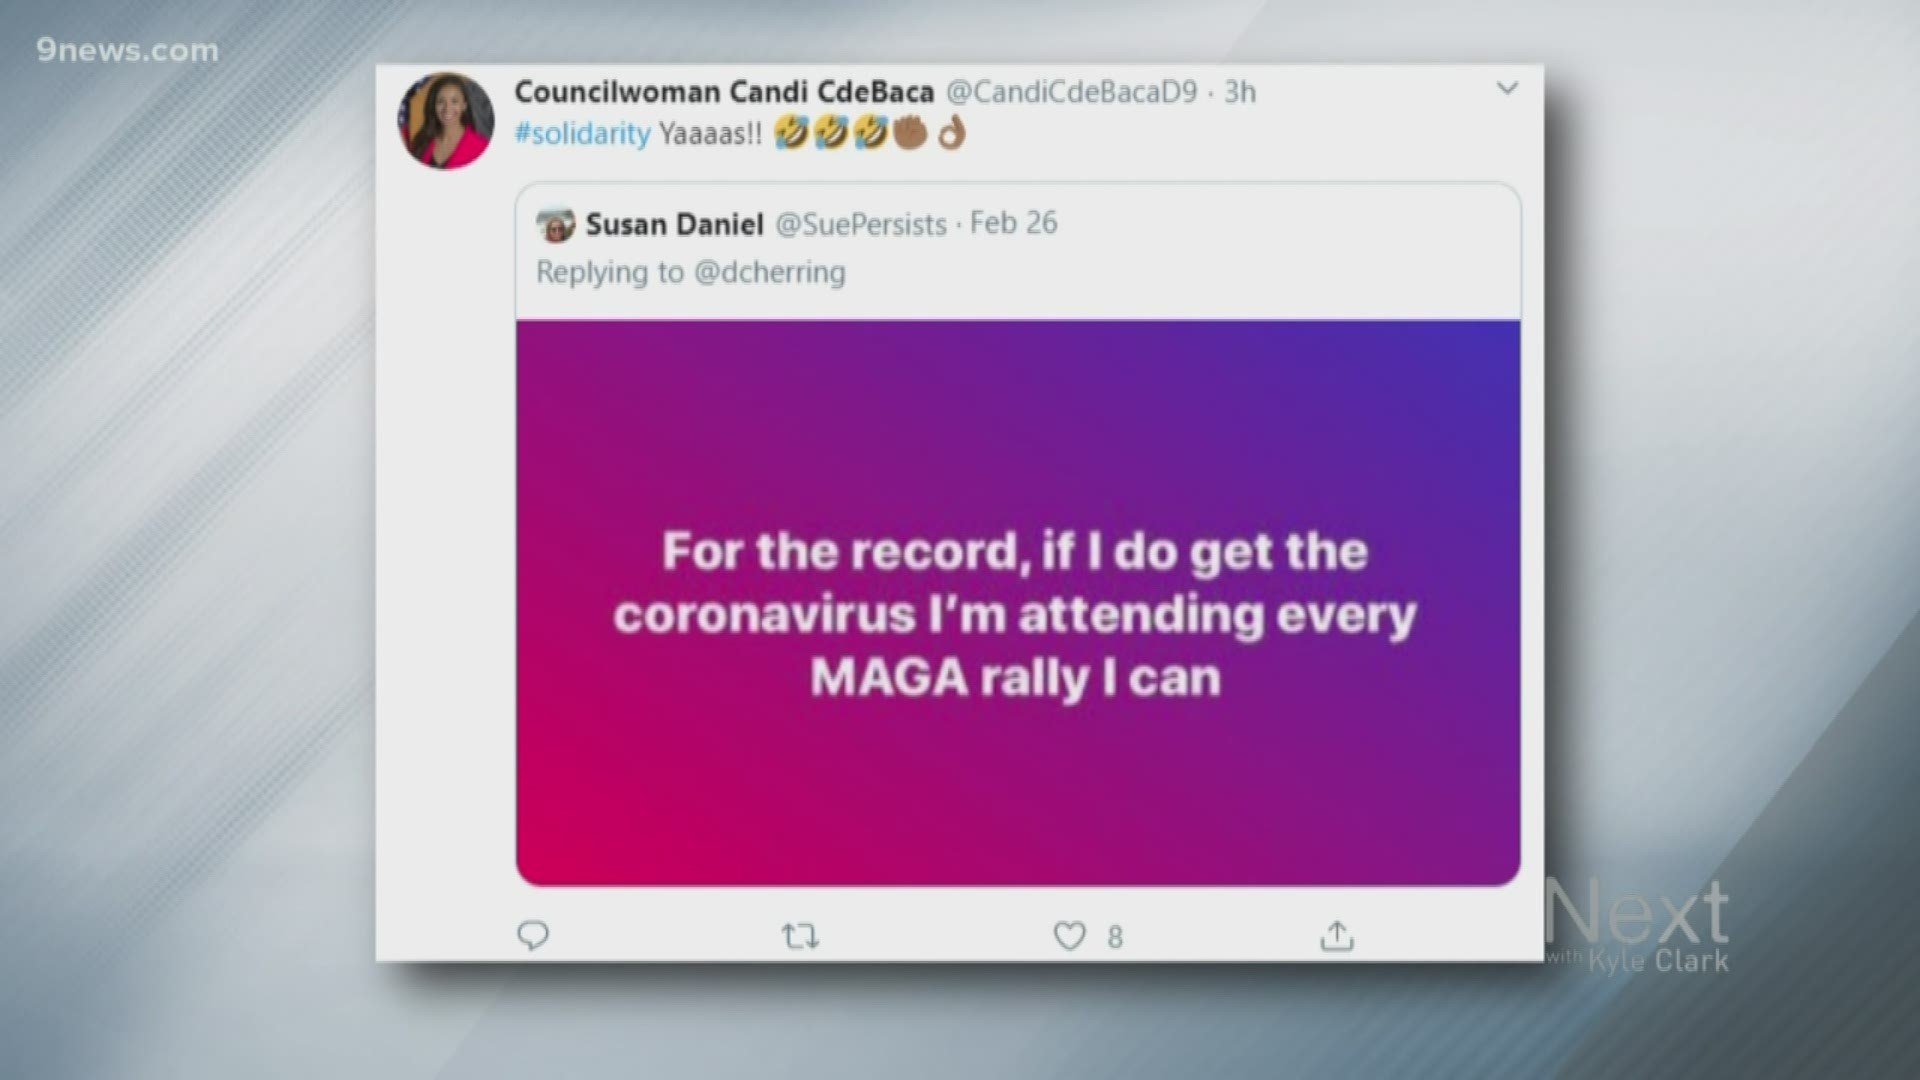 The Colorado Republican Party called the tweet from self-proclaimed Democratic socialist Candi CdeBaca "simply disgusting."